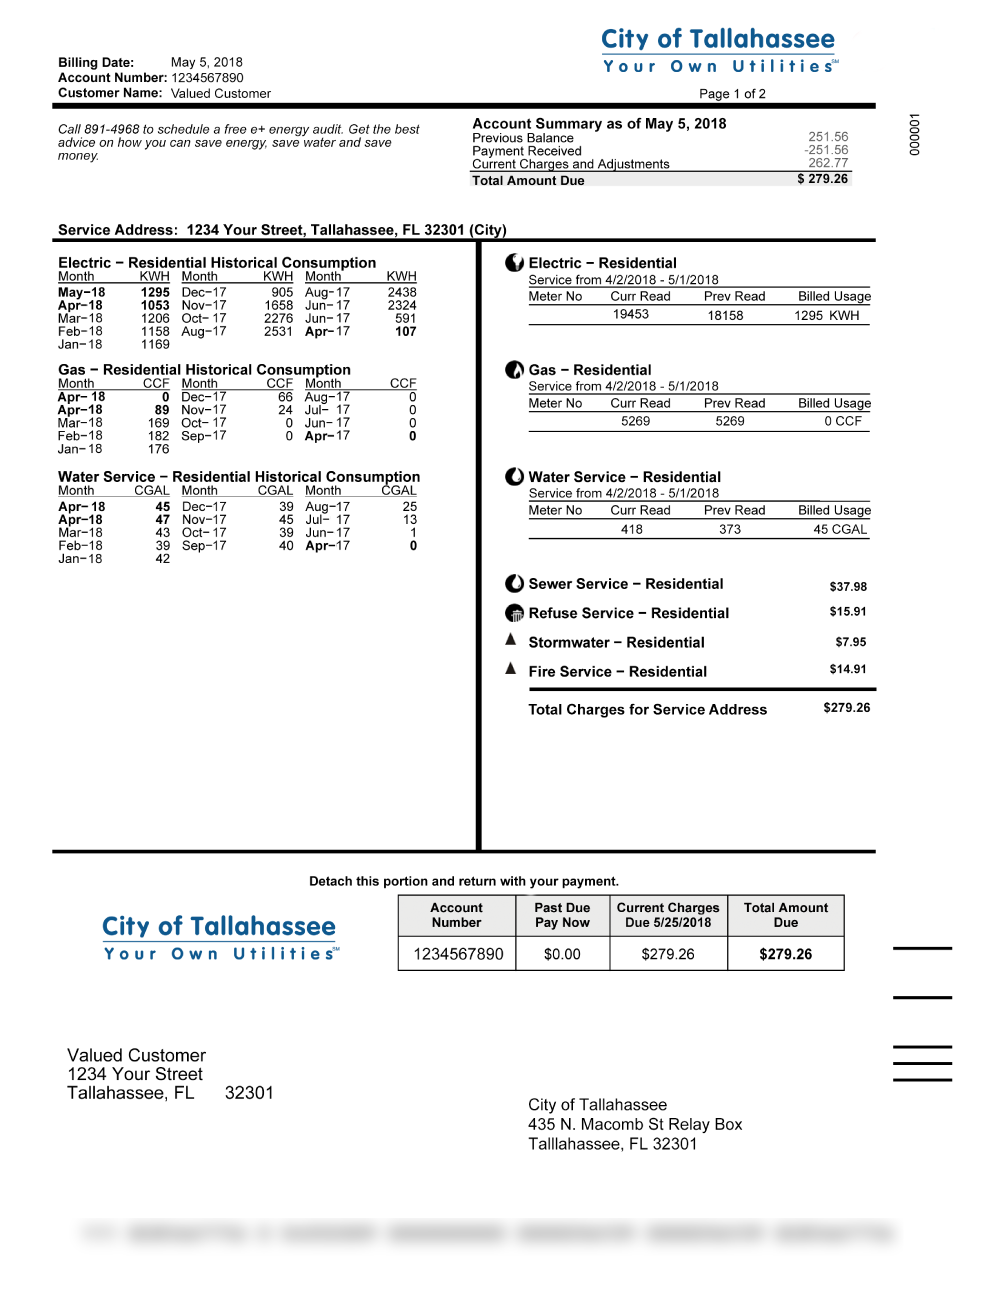 about-your-utility-bill-city-of-tallahassee-utilities